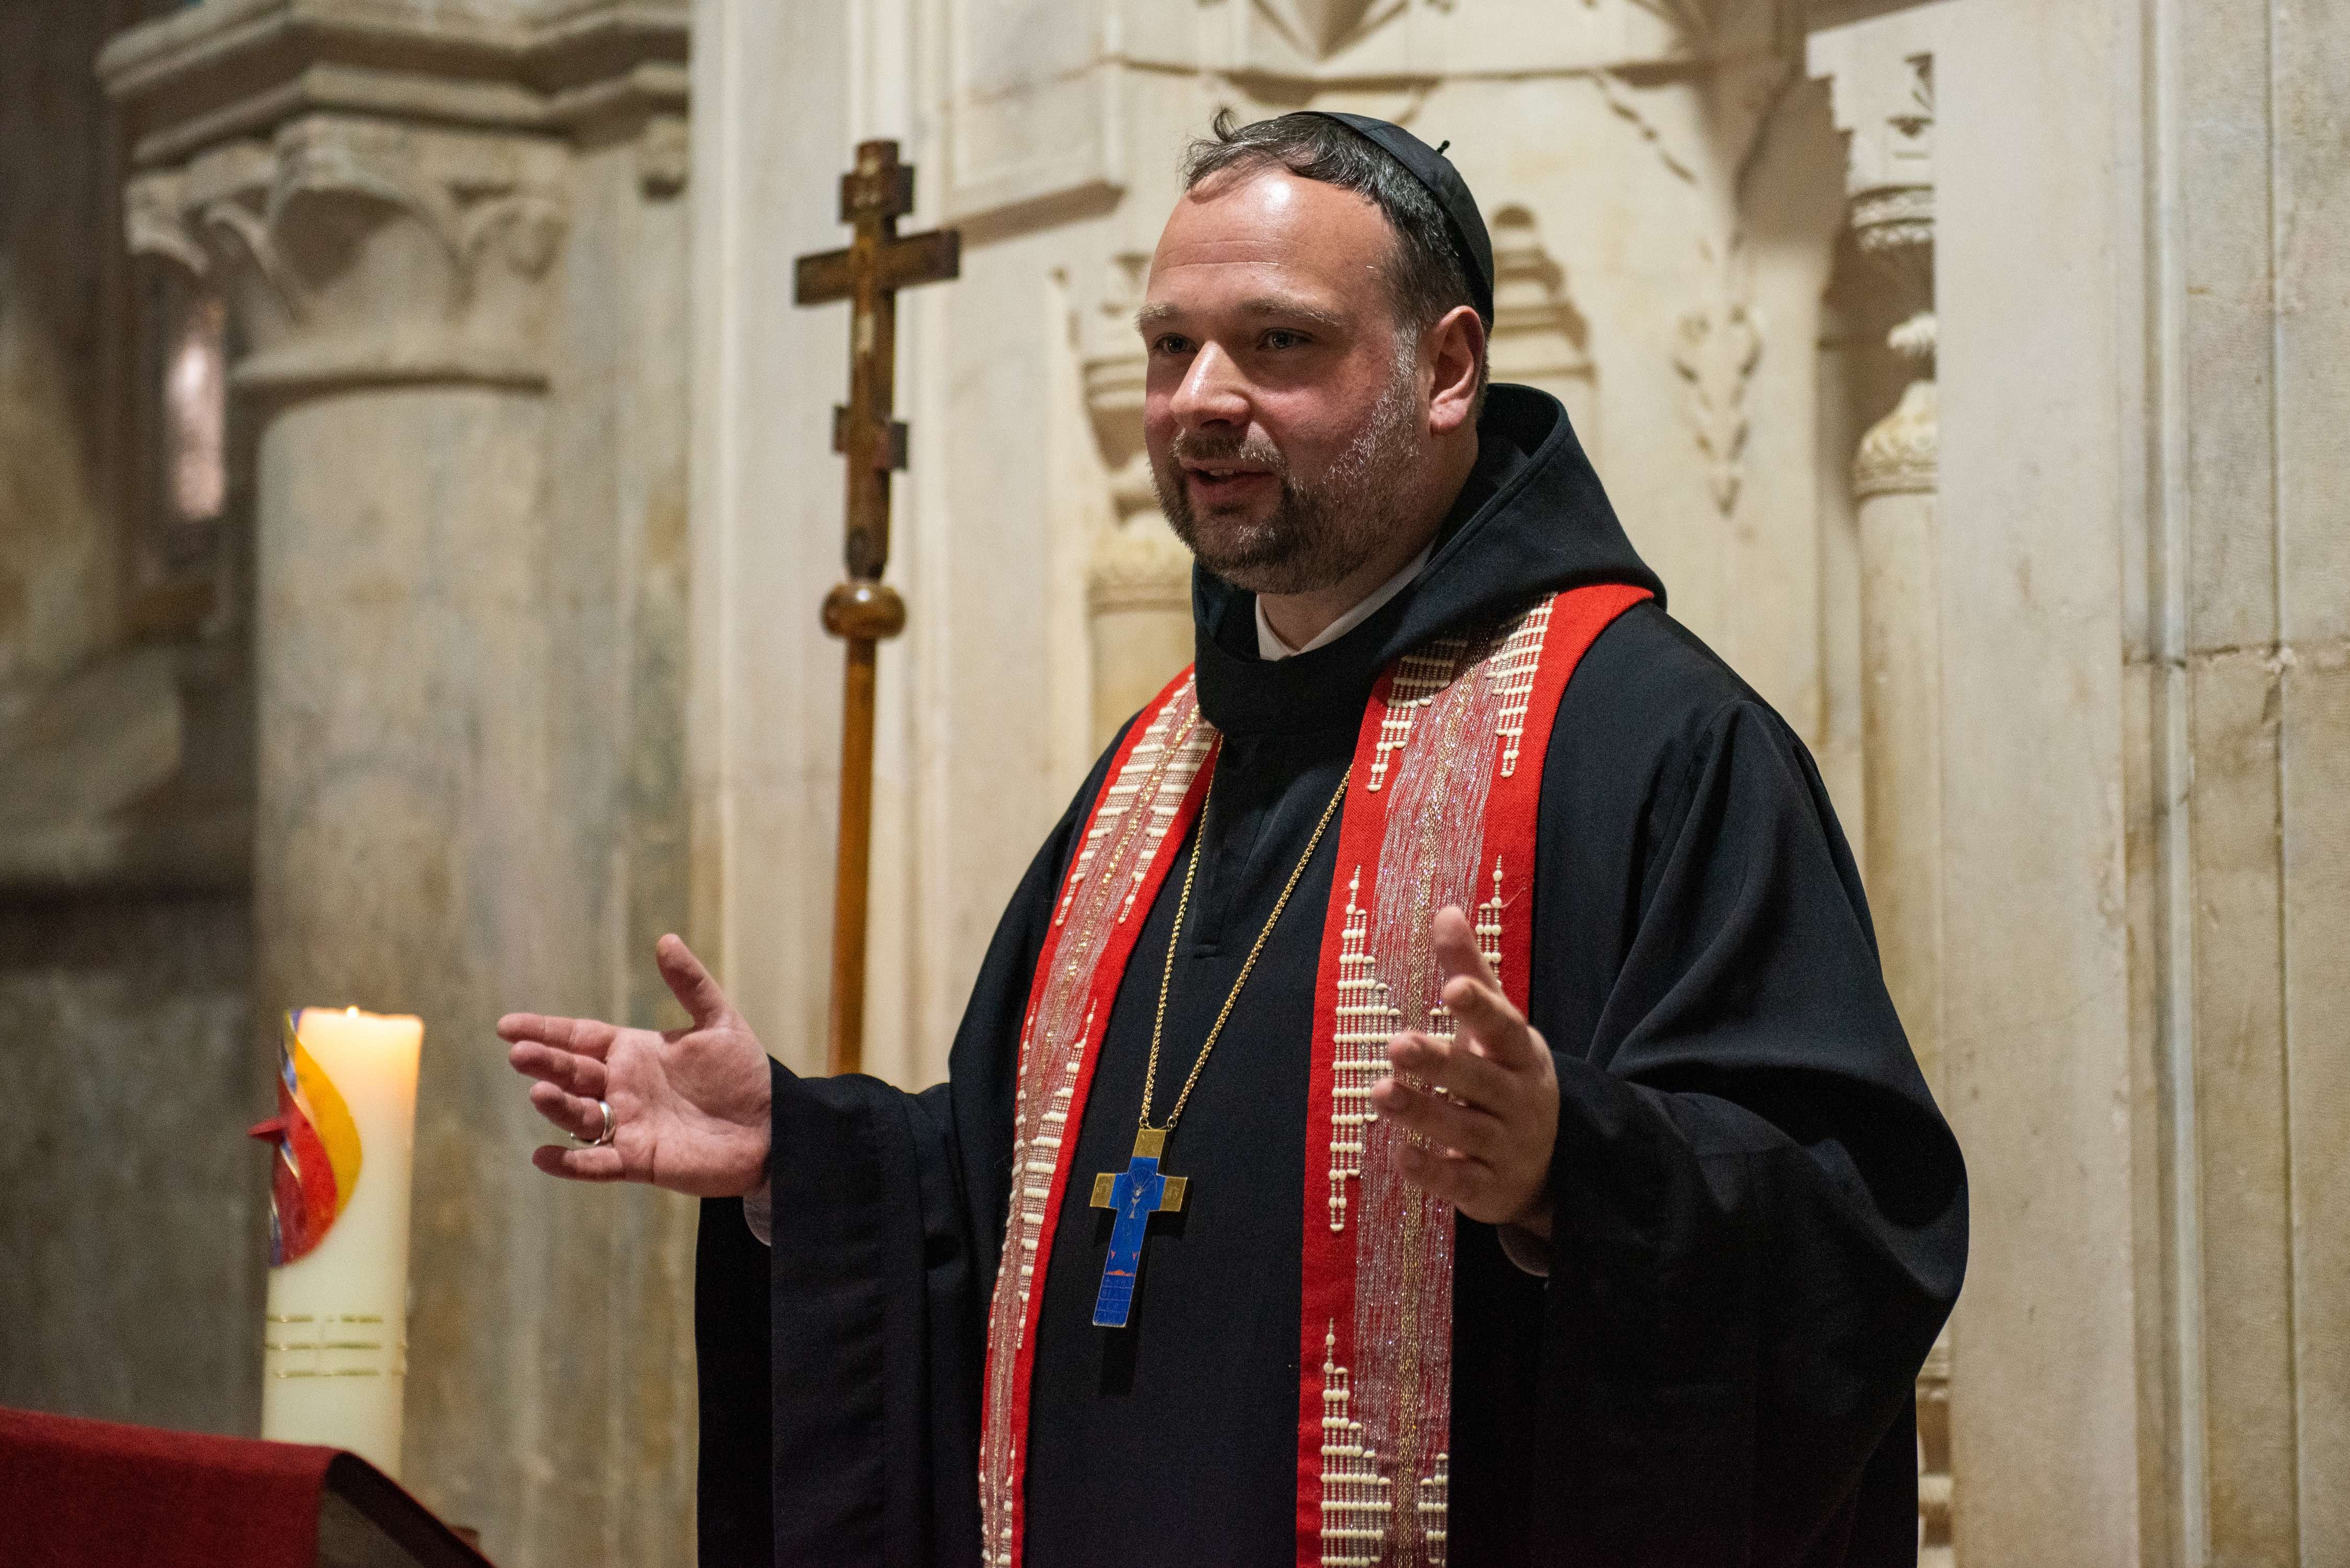 Attack on priest in Jerusalem brings intolerance of Christians back into focus thumbnail